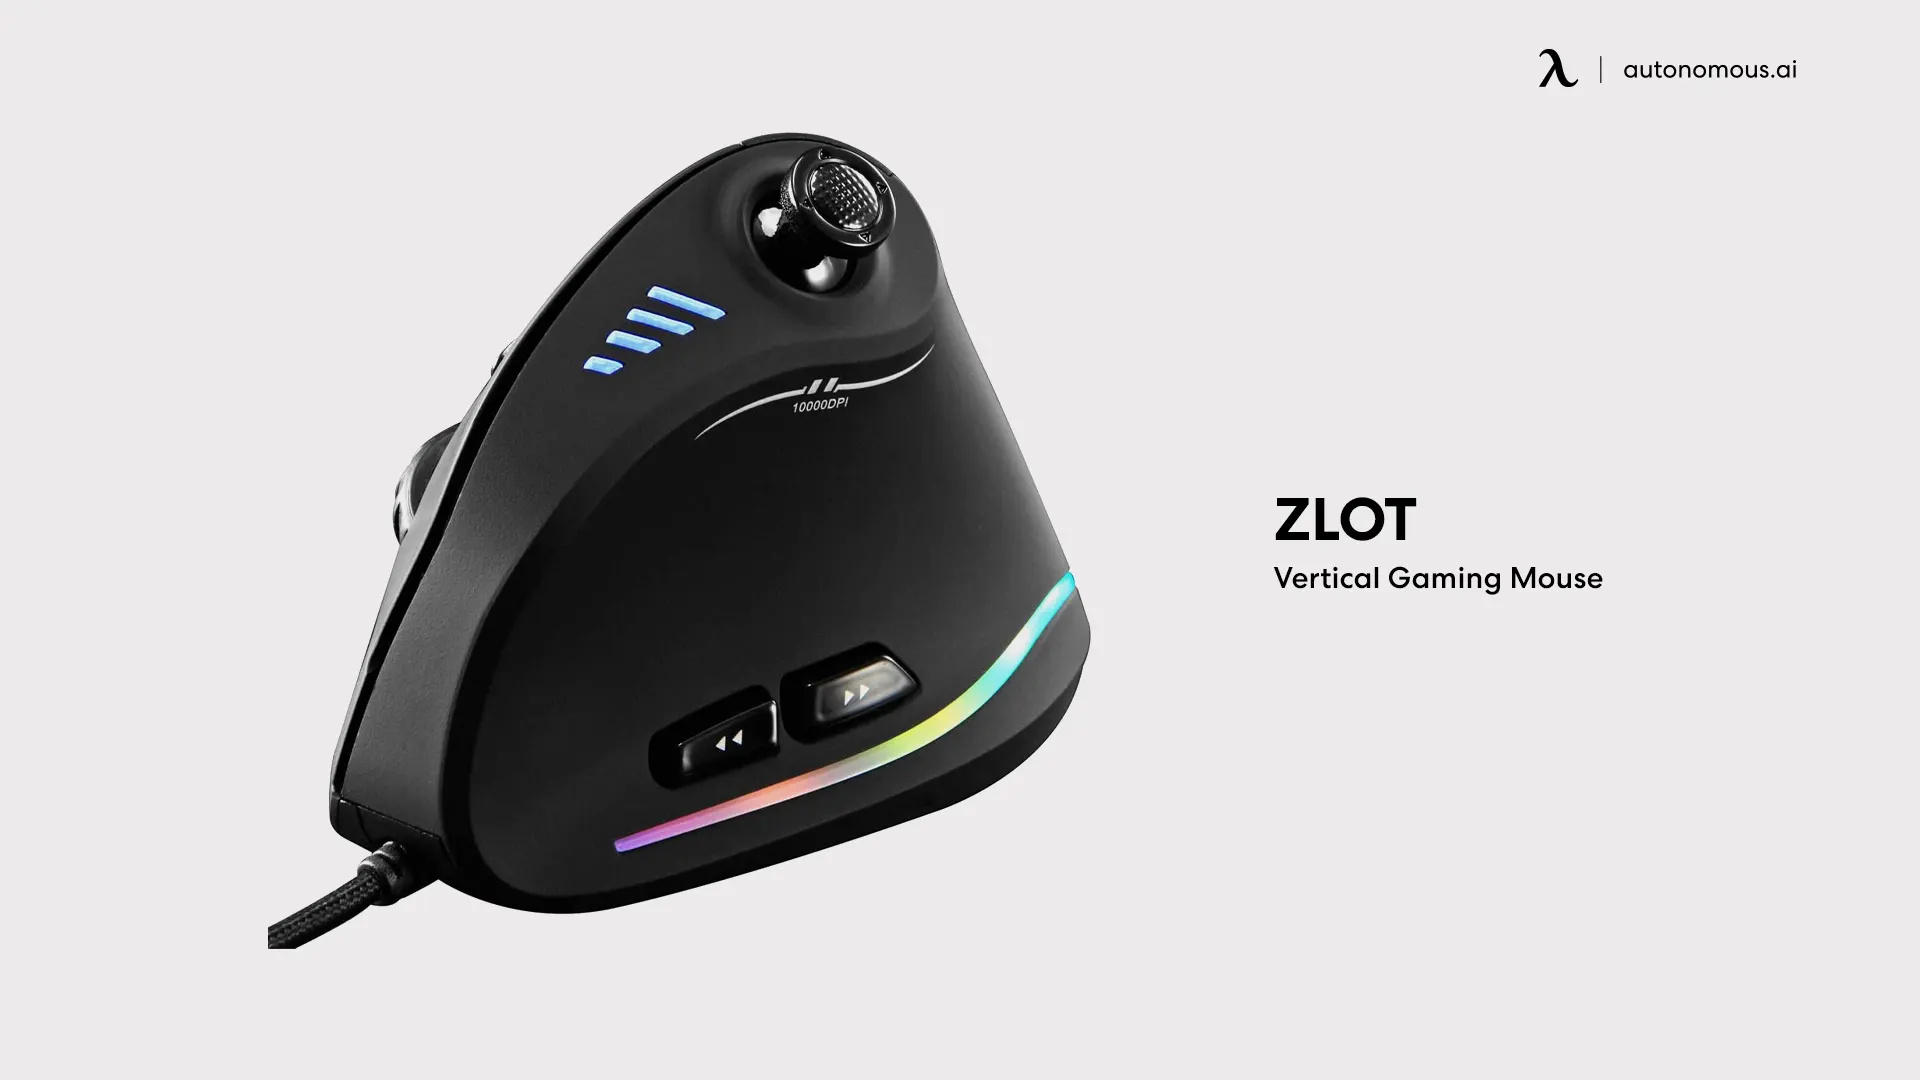 ZLOT Vertical Gaming Mouse